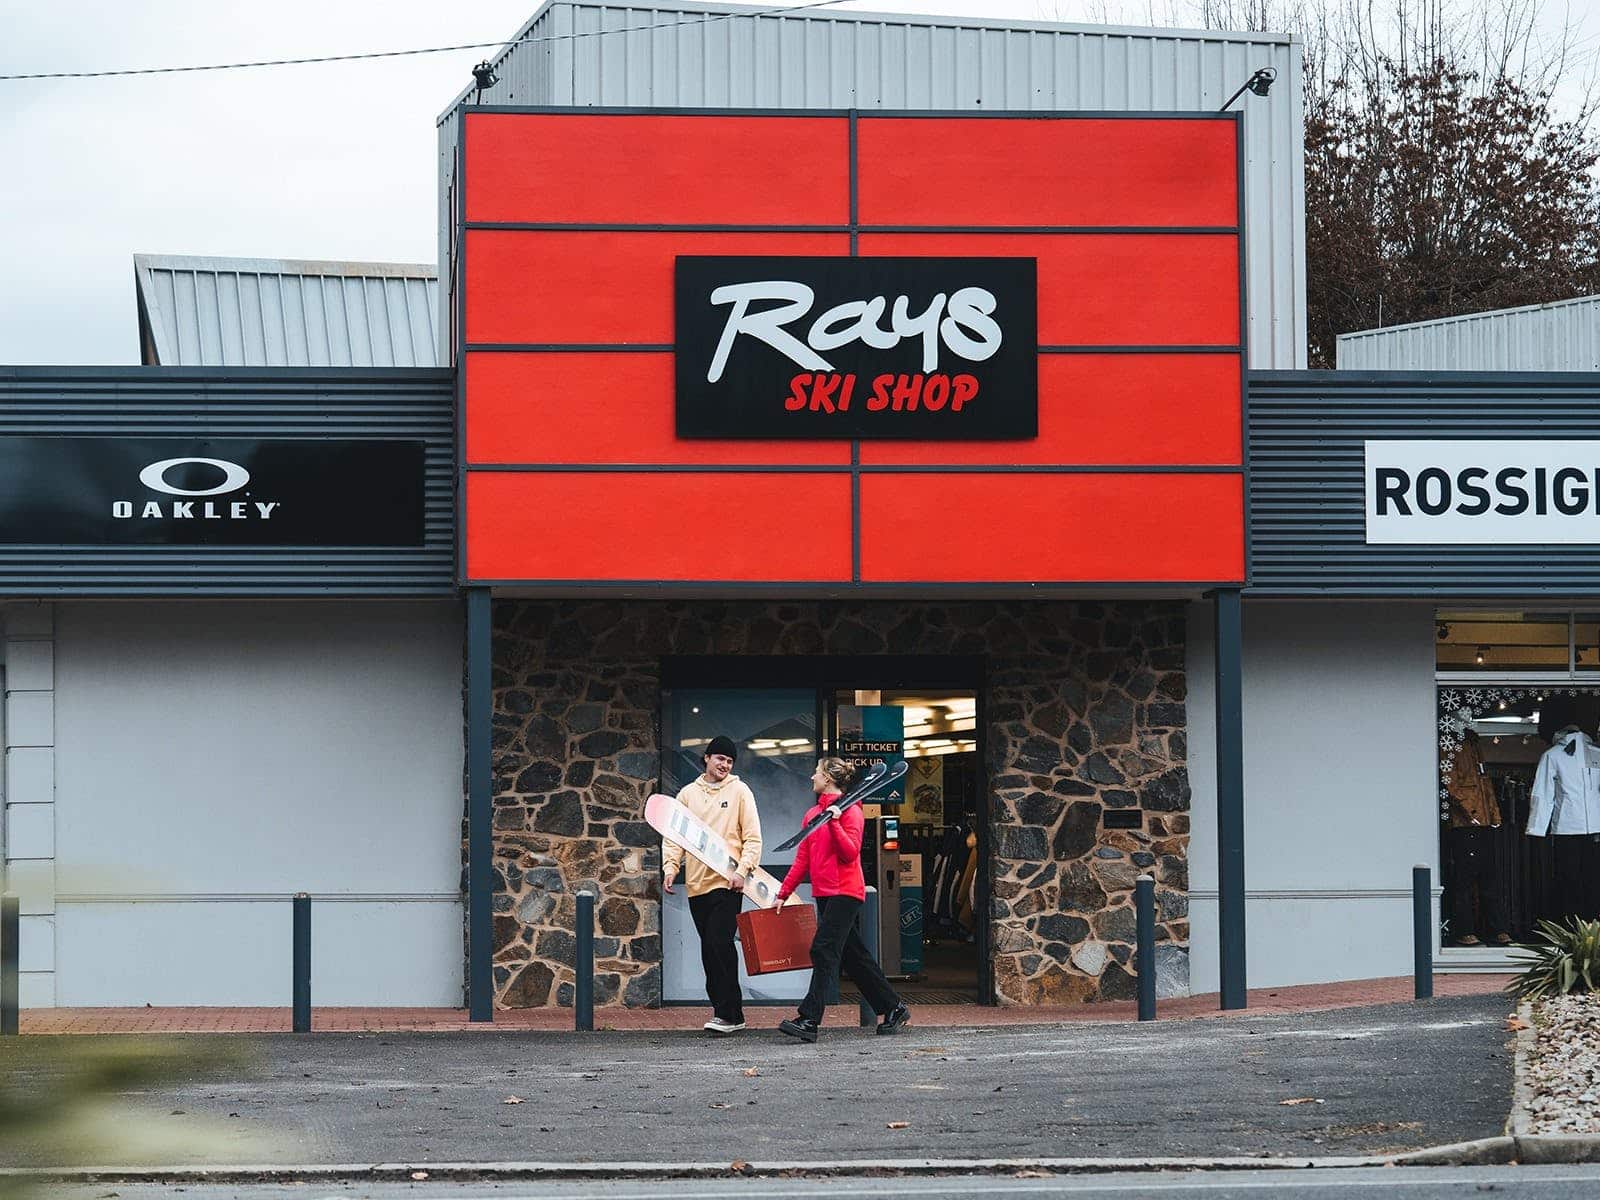 Customers exiting Rays Ski Shop with their purchases